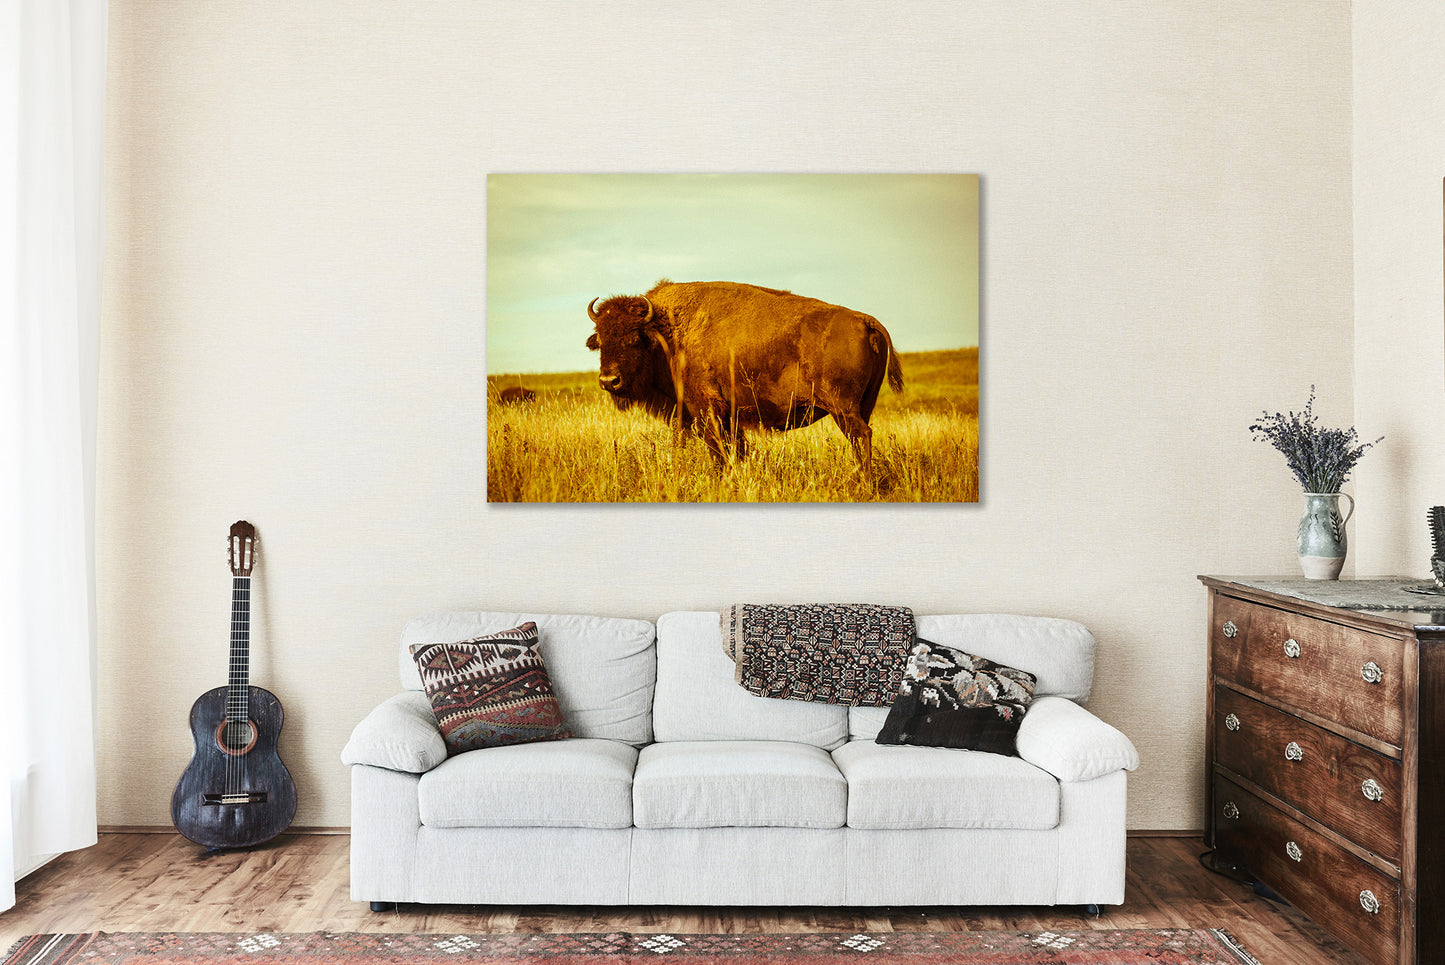 Buffalo Metal Print - Vintage Style Picture of American Bison on the Tallgrass Prairie on Aluminum Metal - Western Wall Art Photo Decor